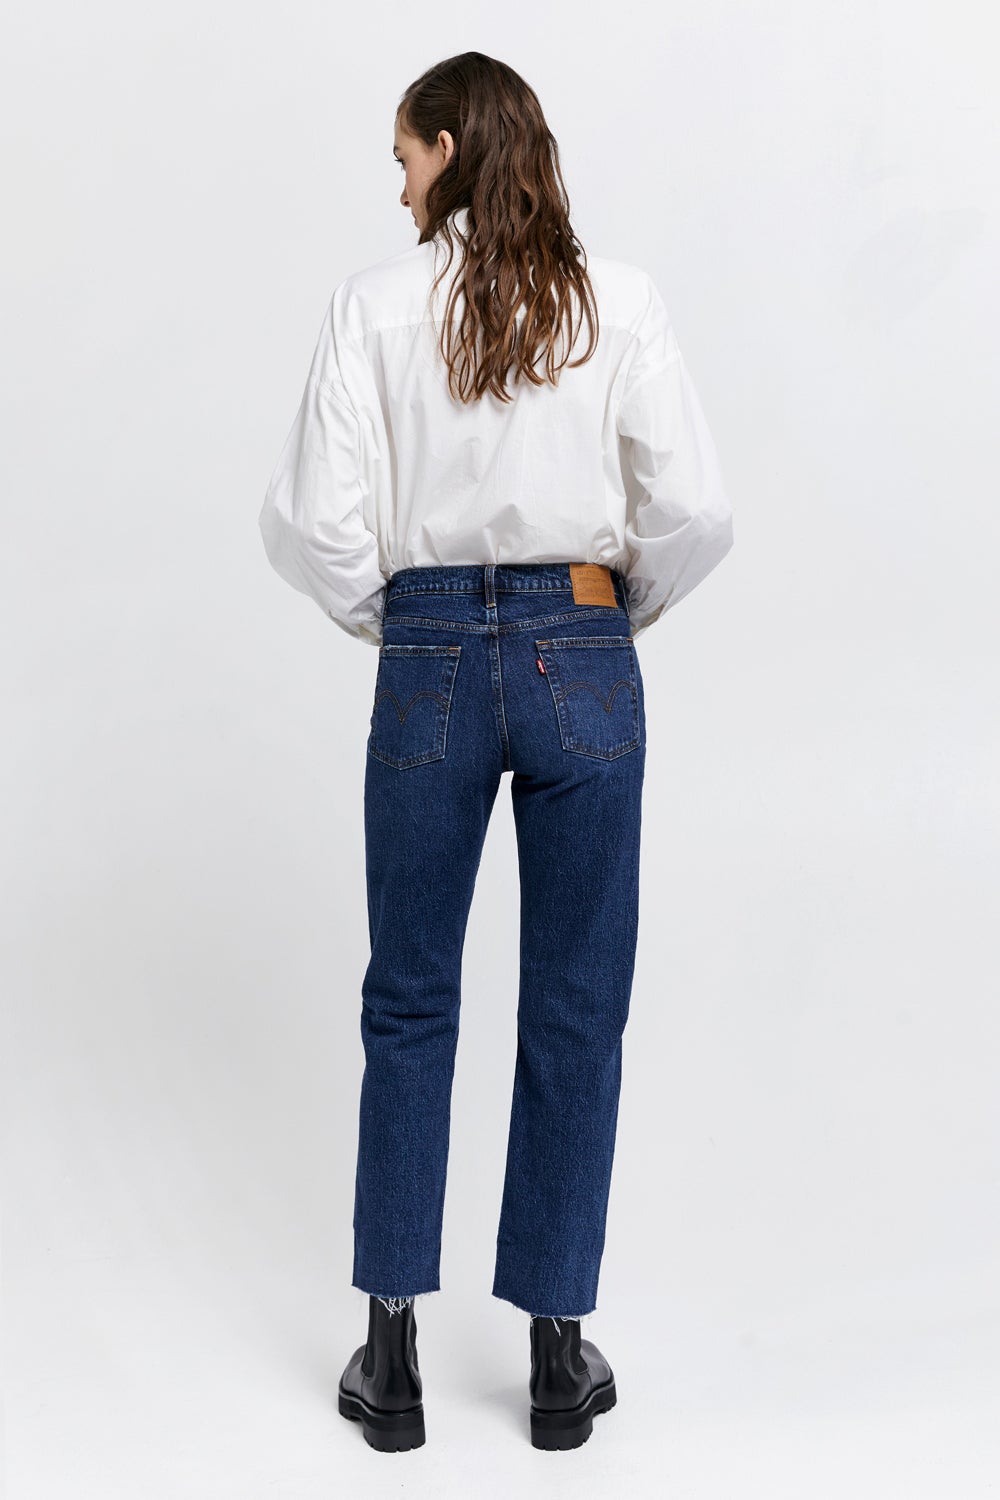 Levi's Wedgie Straight Jeans Salsa Roll